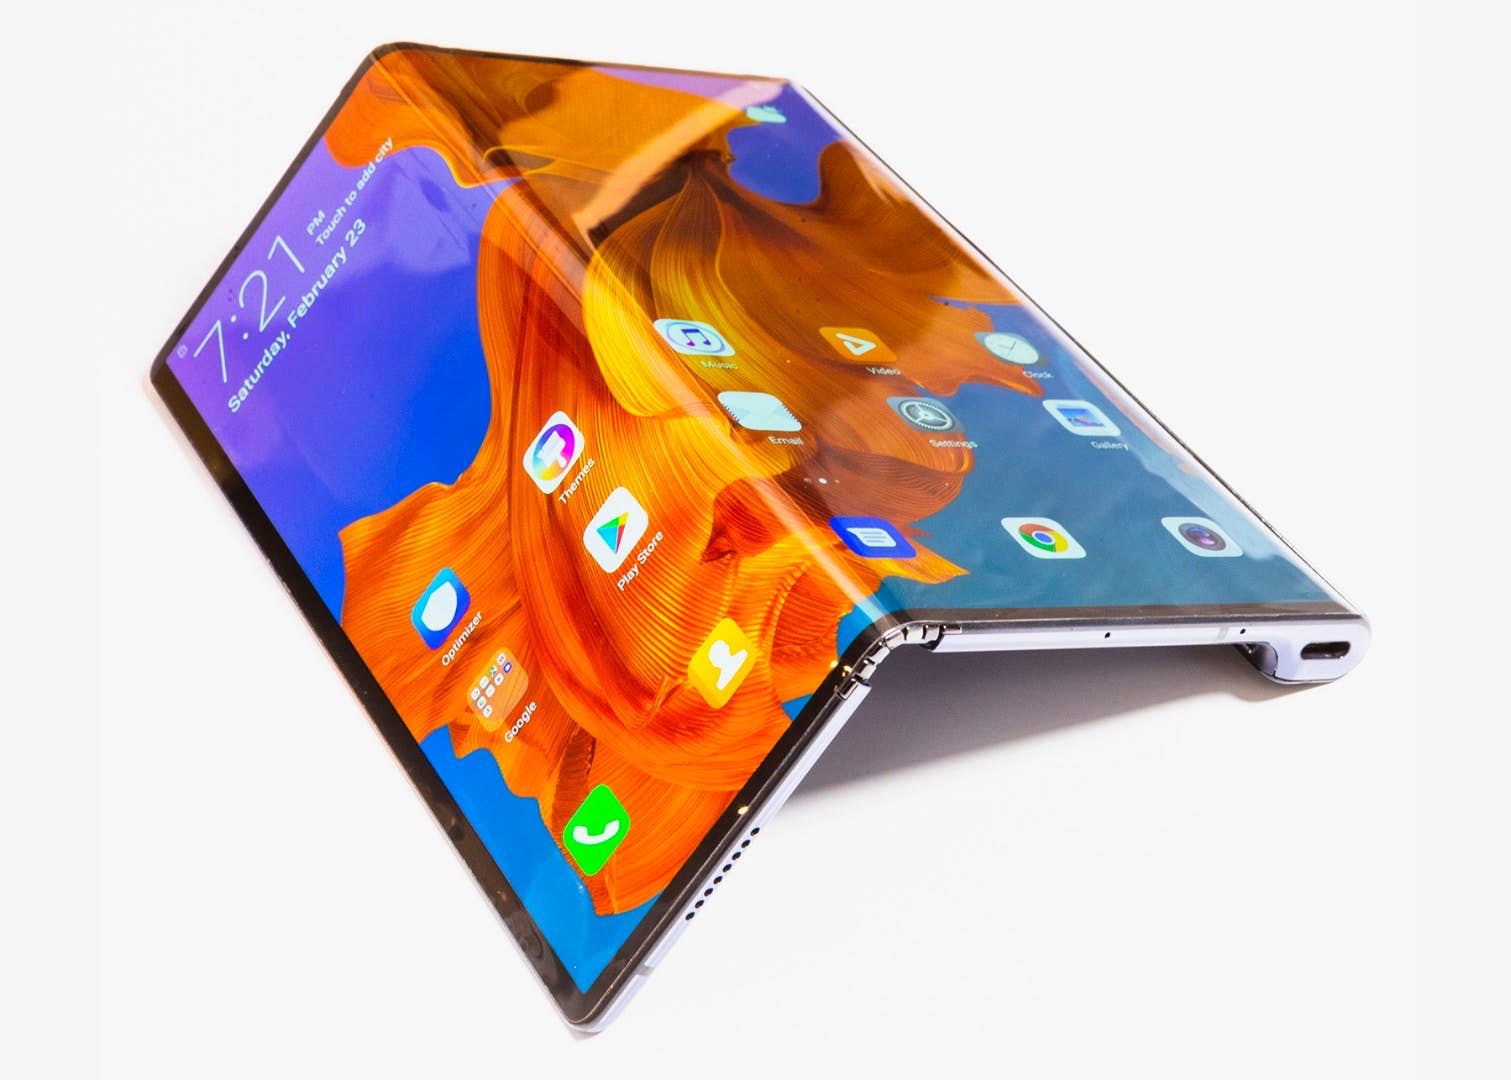 Folding screens make much more sense for tablets.